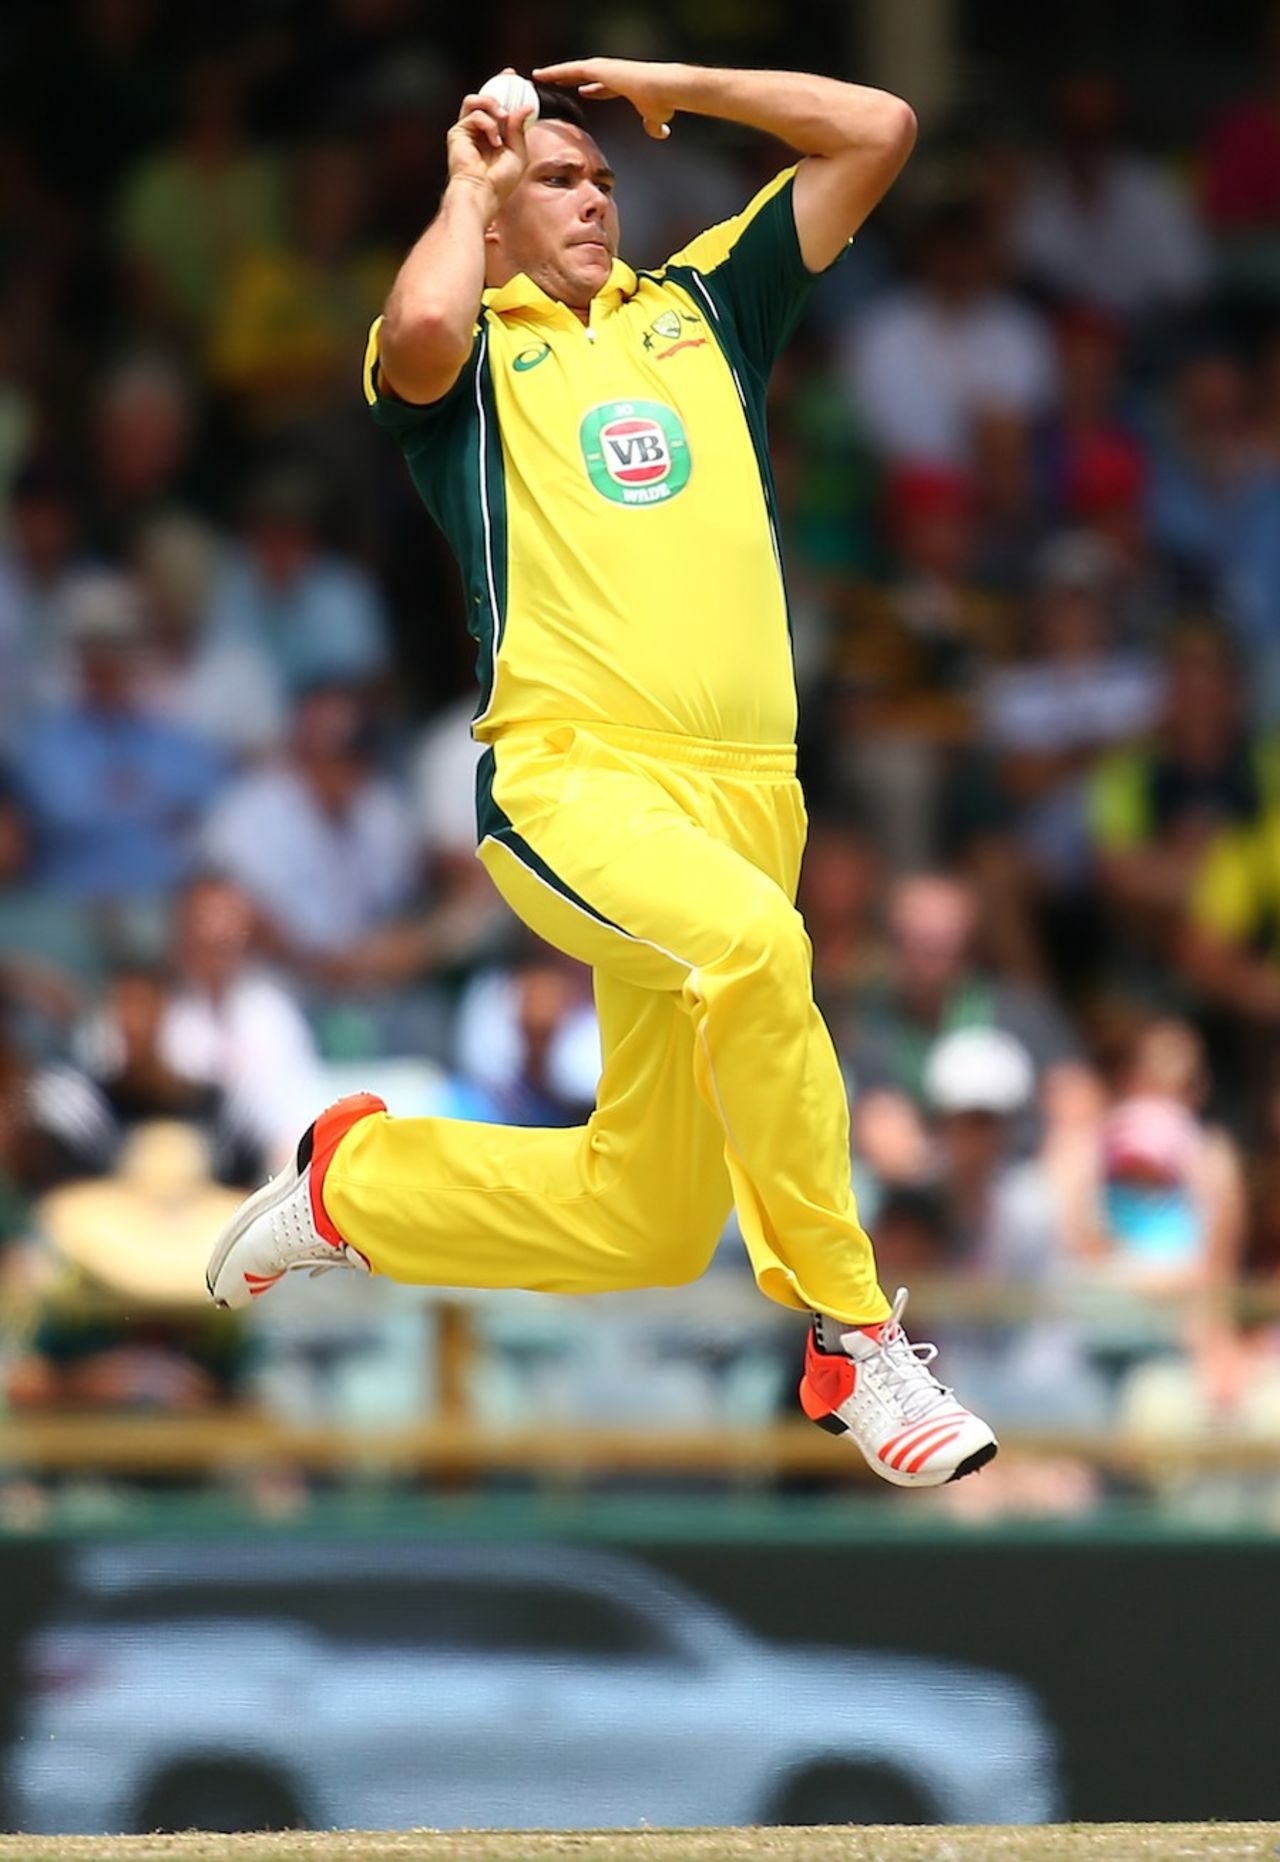 Scott Boland leaps as he approaches the bowling crease,  Australia v India, 1st ODI, Perth, January 12, 2016